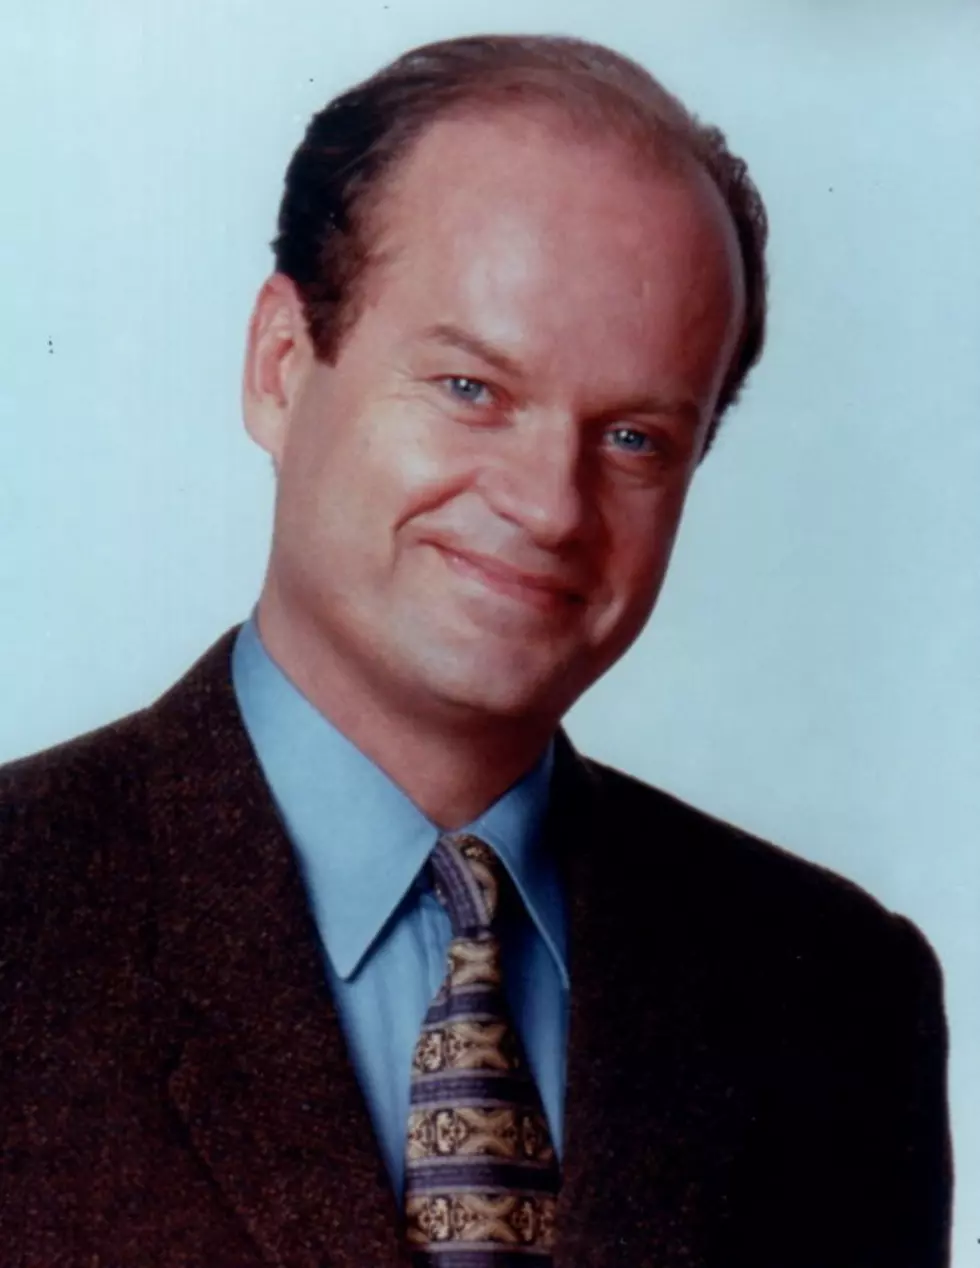 TV Star Kelsey Grammer to Open Brewery in Delaware County!